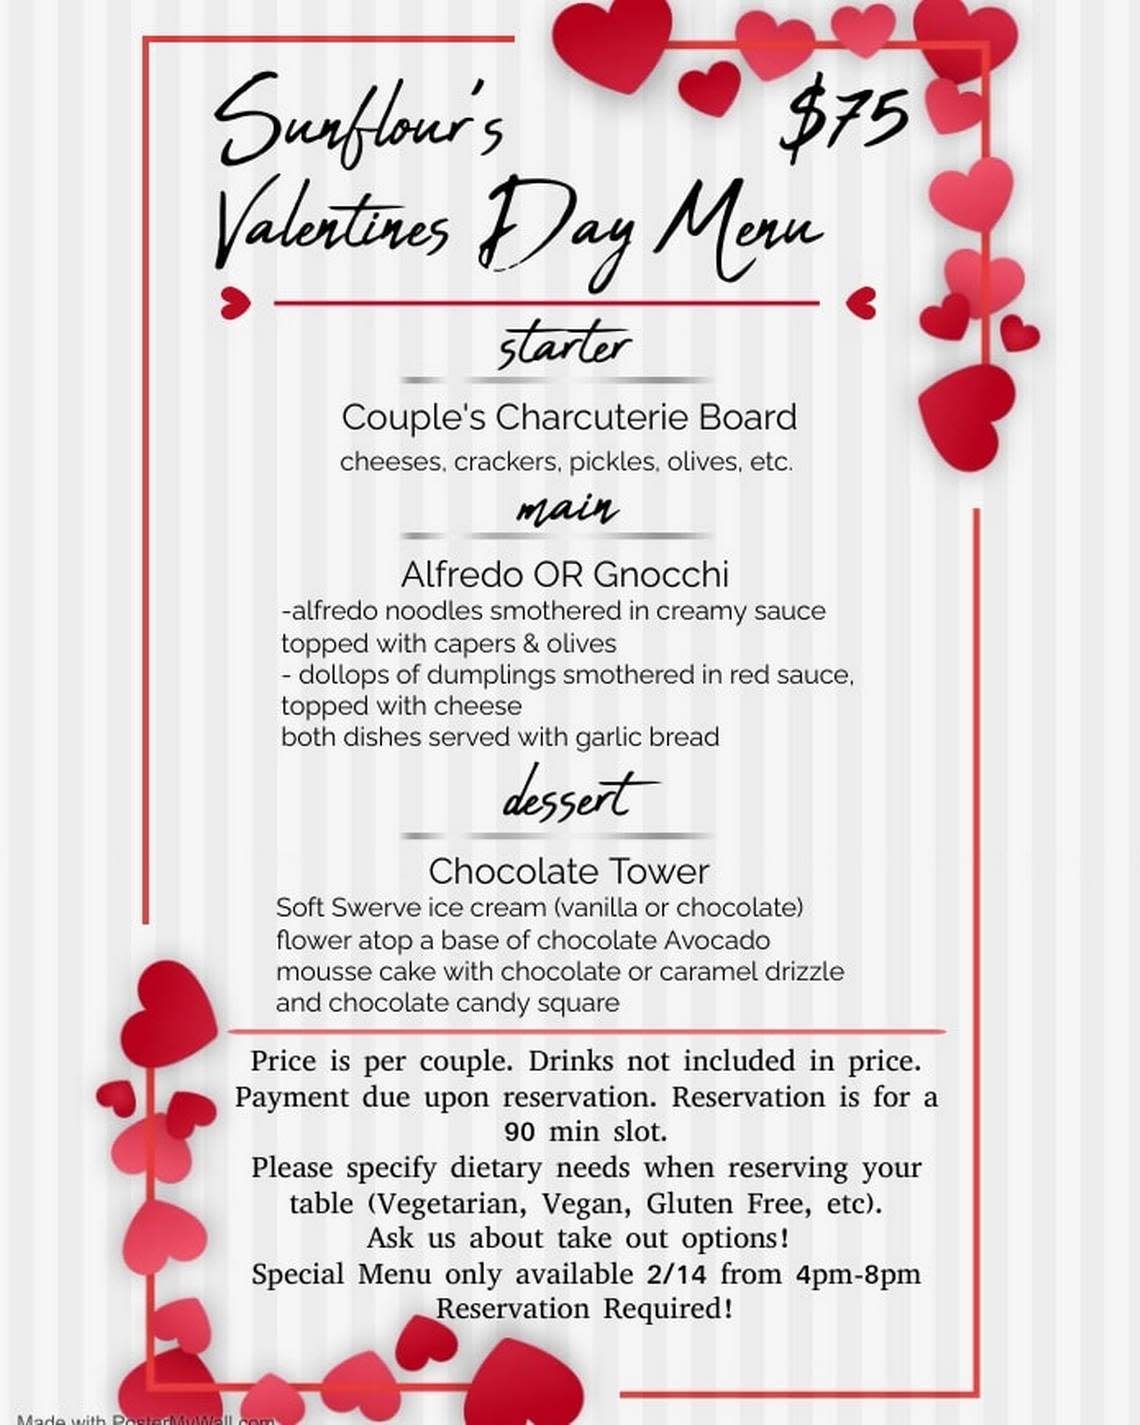 Details on the special Valentine’s Day menu being offered at Wichita’s Sunflour Cafe